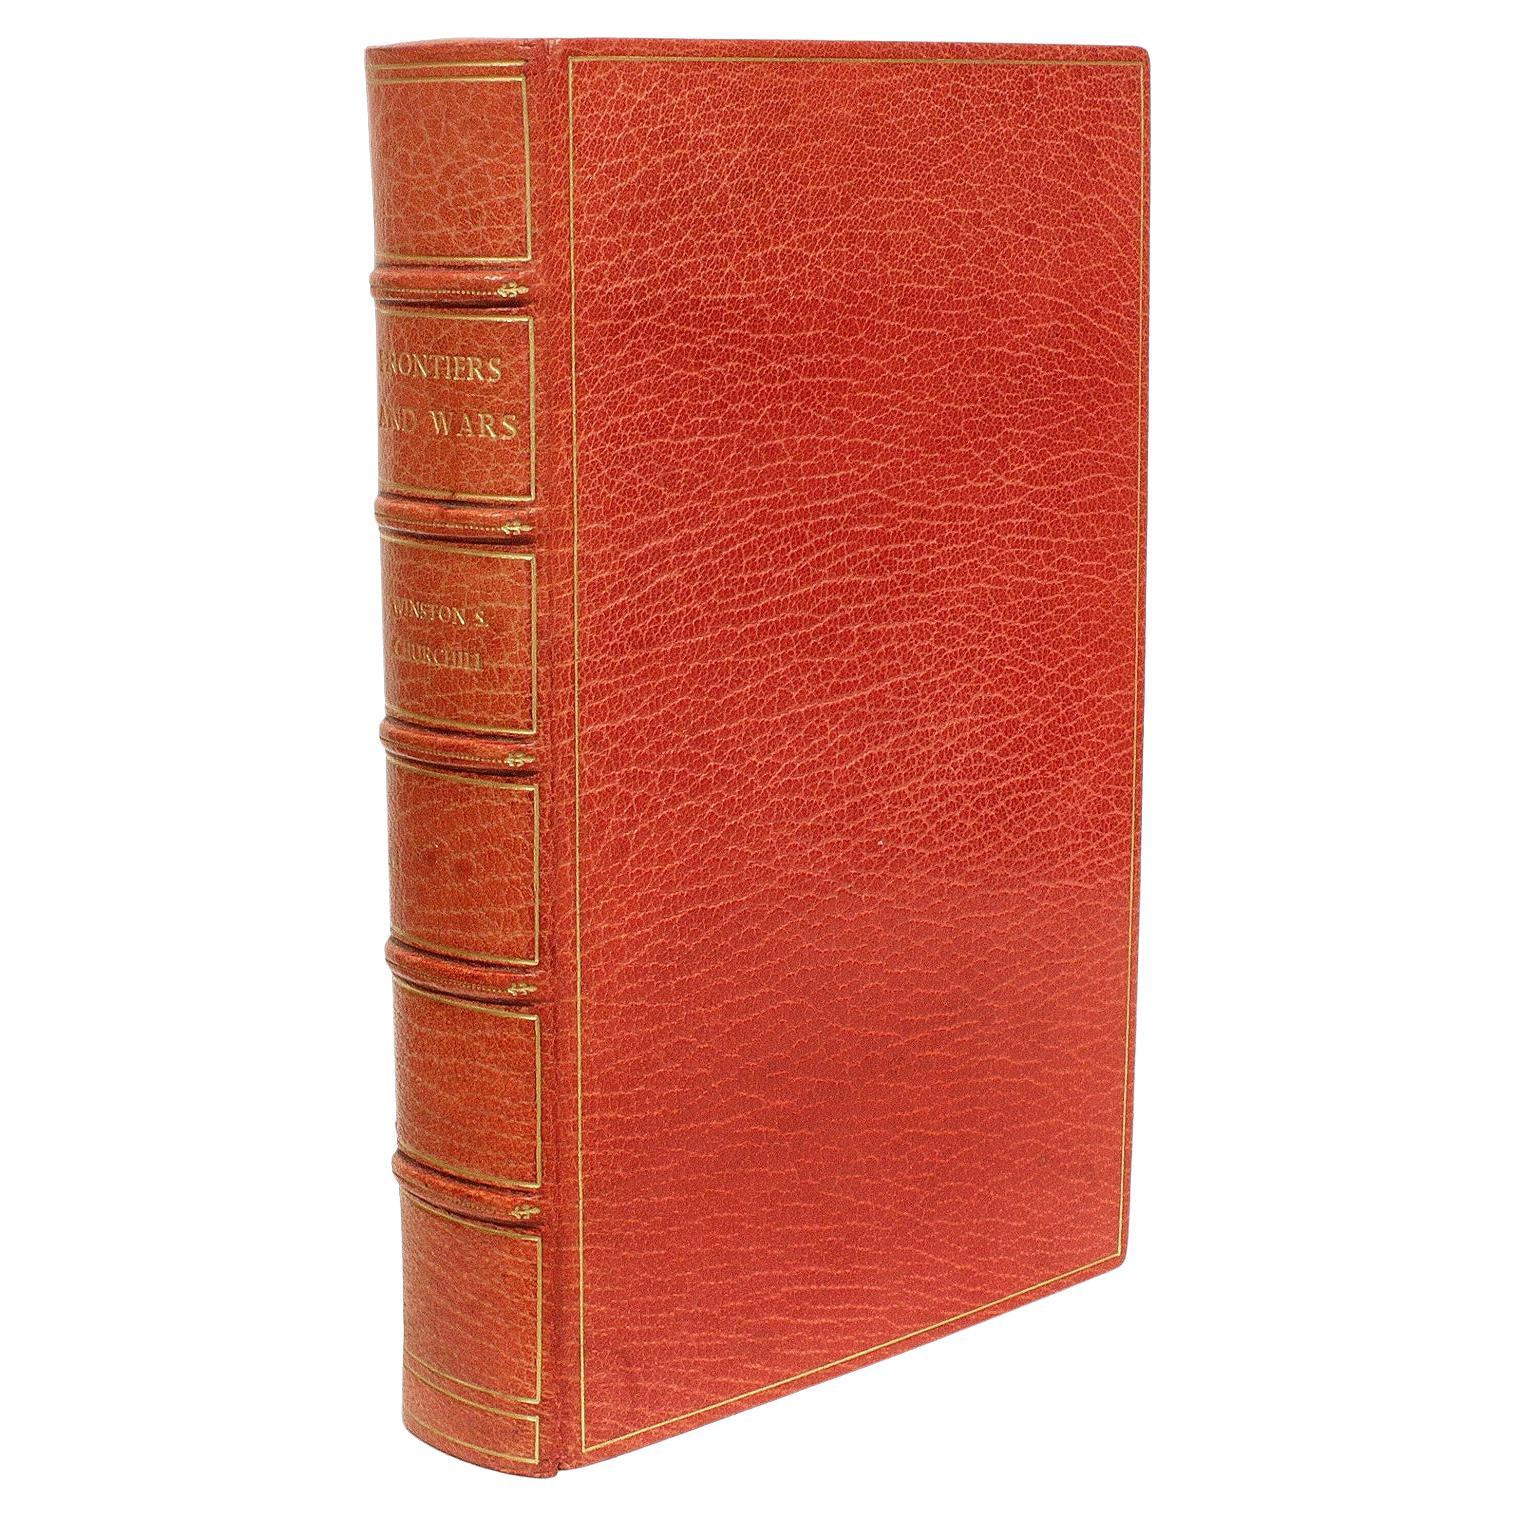 Churchill, Frontiers & Wars, First Edition, 1962, in a Fine Leather Binding